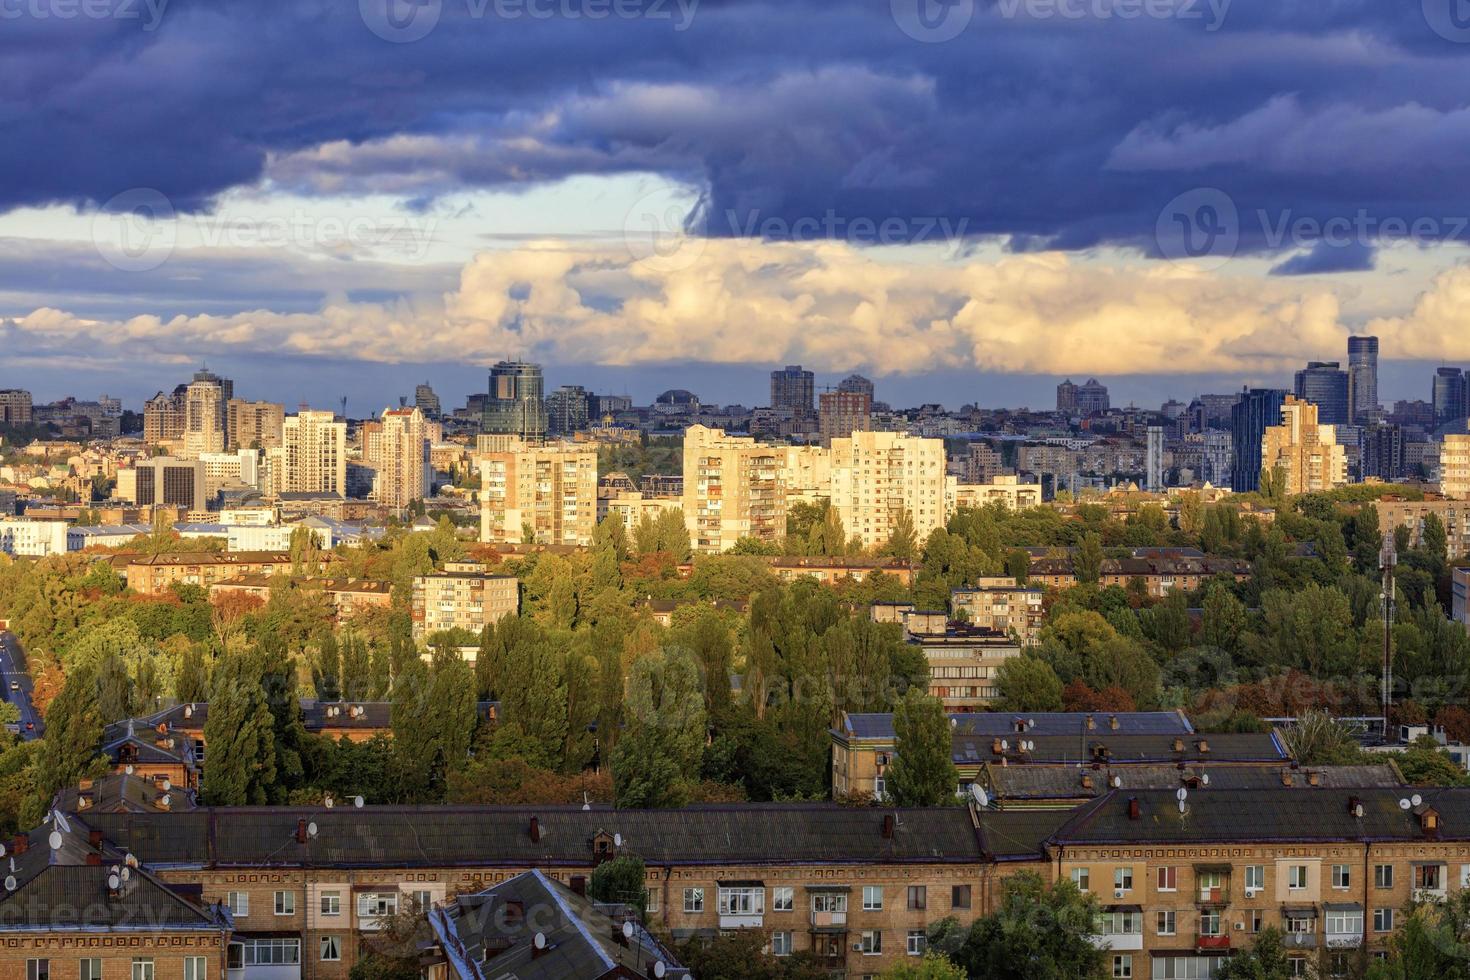 The beautiful light of the setting sun falls on the houses in the city landscape. photo